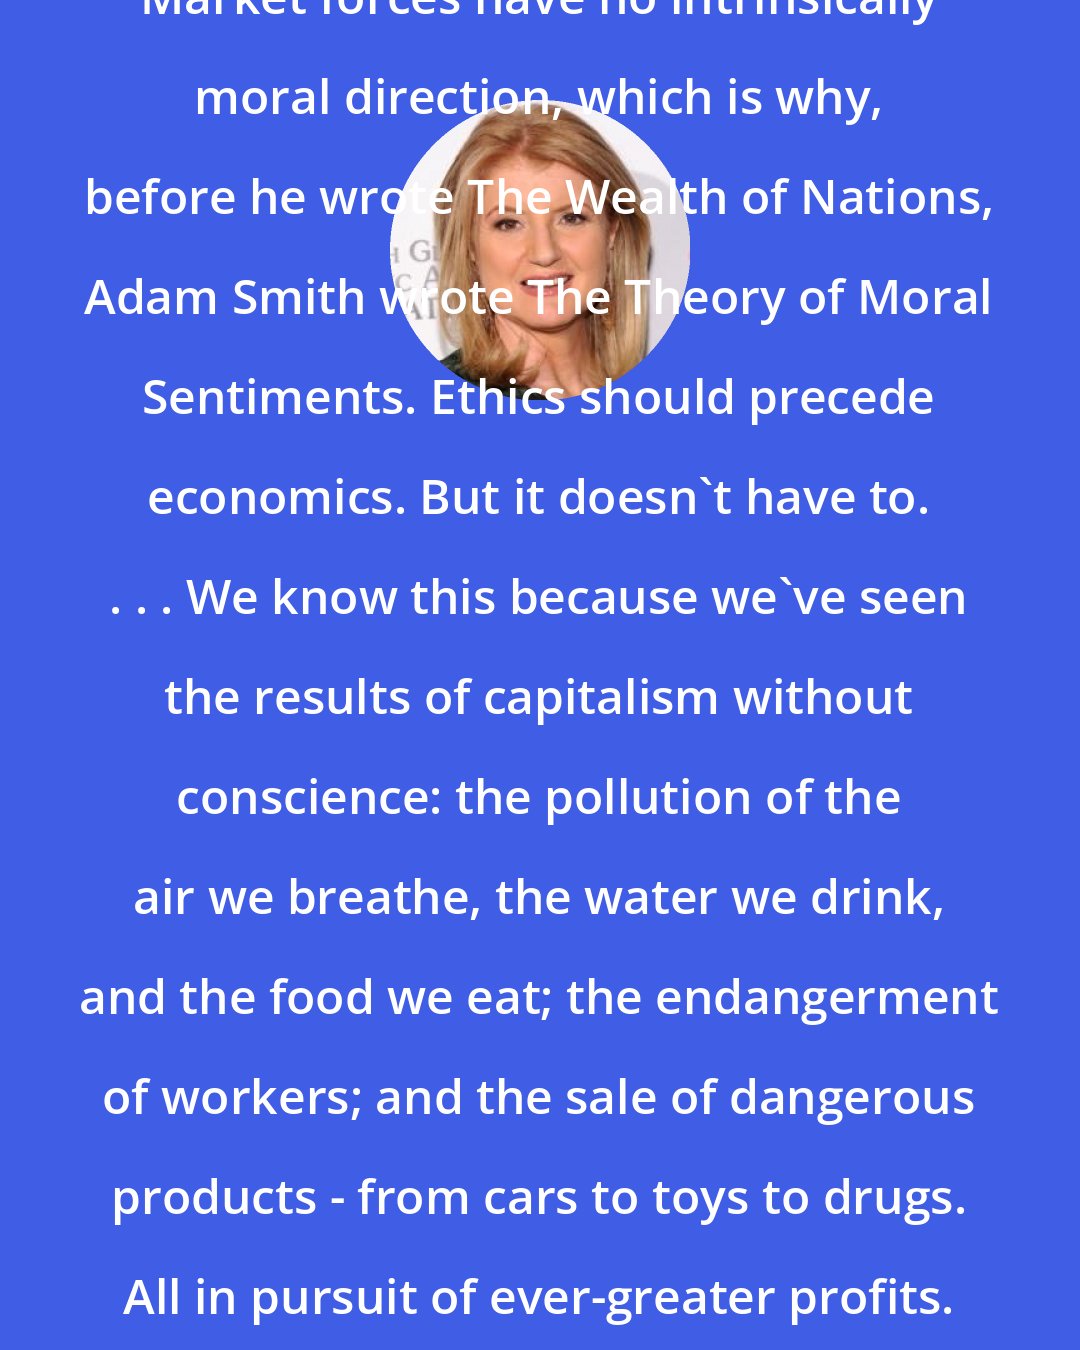 Arianna Huffington: Market forces have no intrinsically moral direction, which is why, before he wrote The Wealth of Nations, Adam Smith wrote The Theory of Moral Sentiments. Ethics should precede economics. But it doesn't have to. . . . We know this because we've seen the results of capitalism without conscience: the pollution of the air we breathe, the water we drink, and the food we eat; the endangerment of workers; and the sale of dangerous products - from cars to toys to drugs. All in pursuit of ever-greater profits.